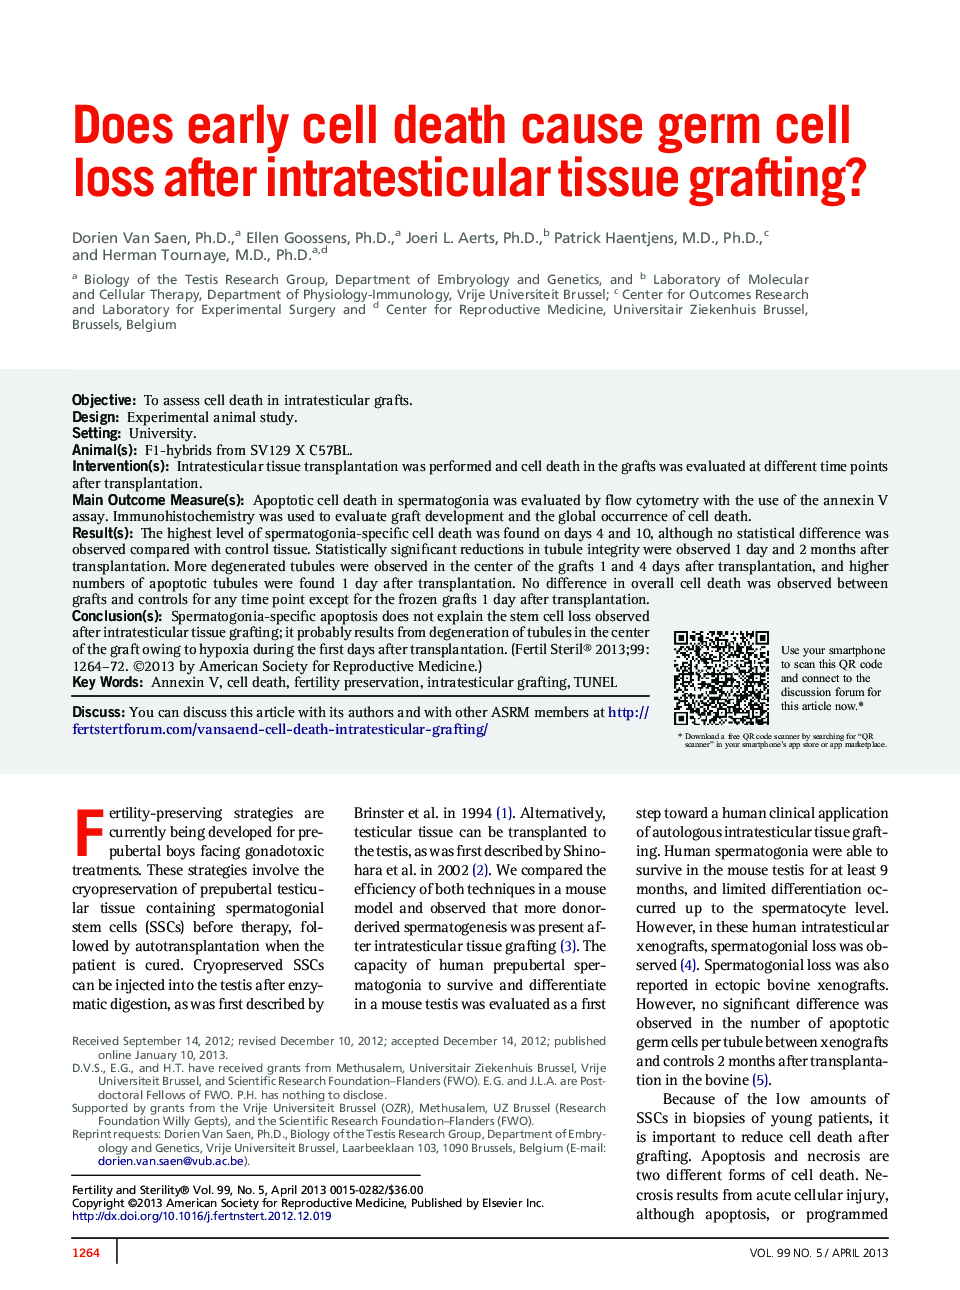 Does early cell death cause germ cell loss after intratesticular tissue grafting?